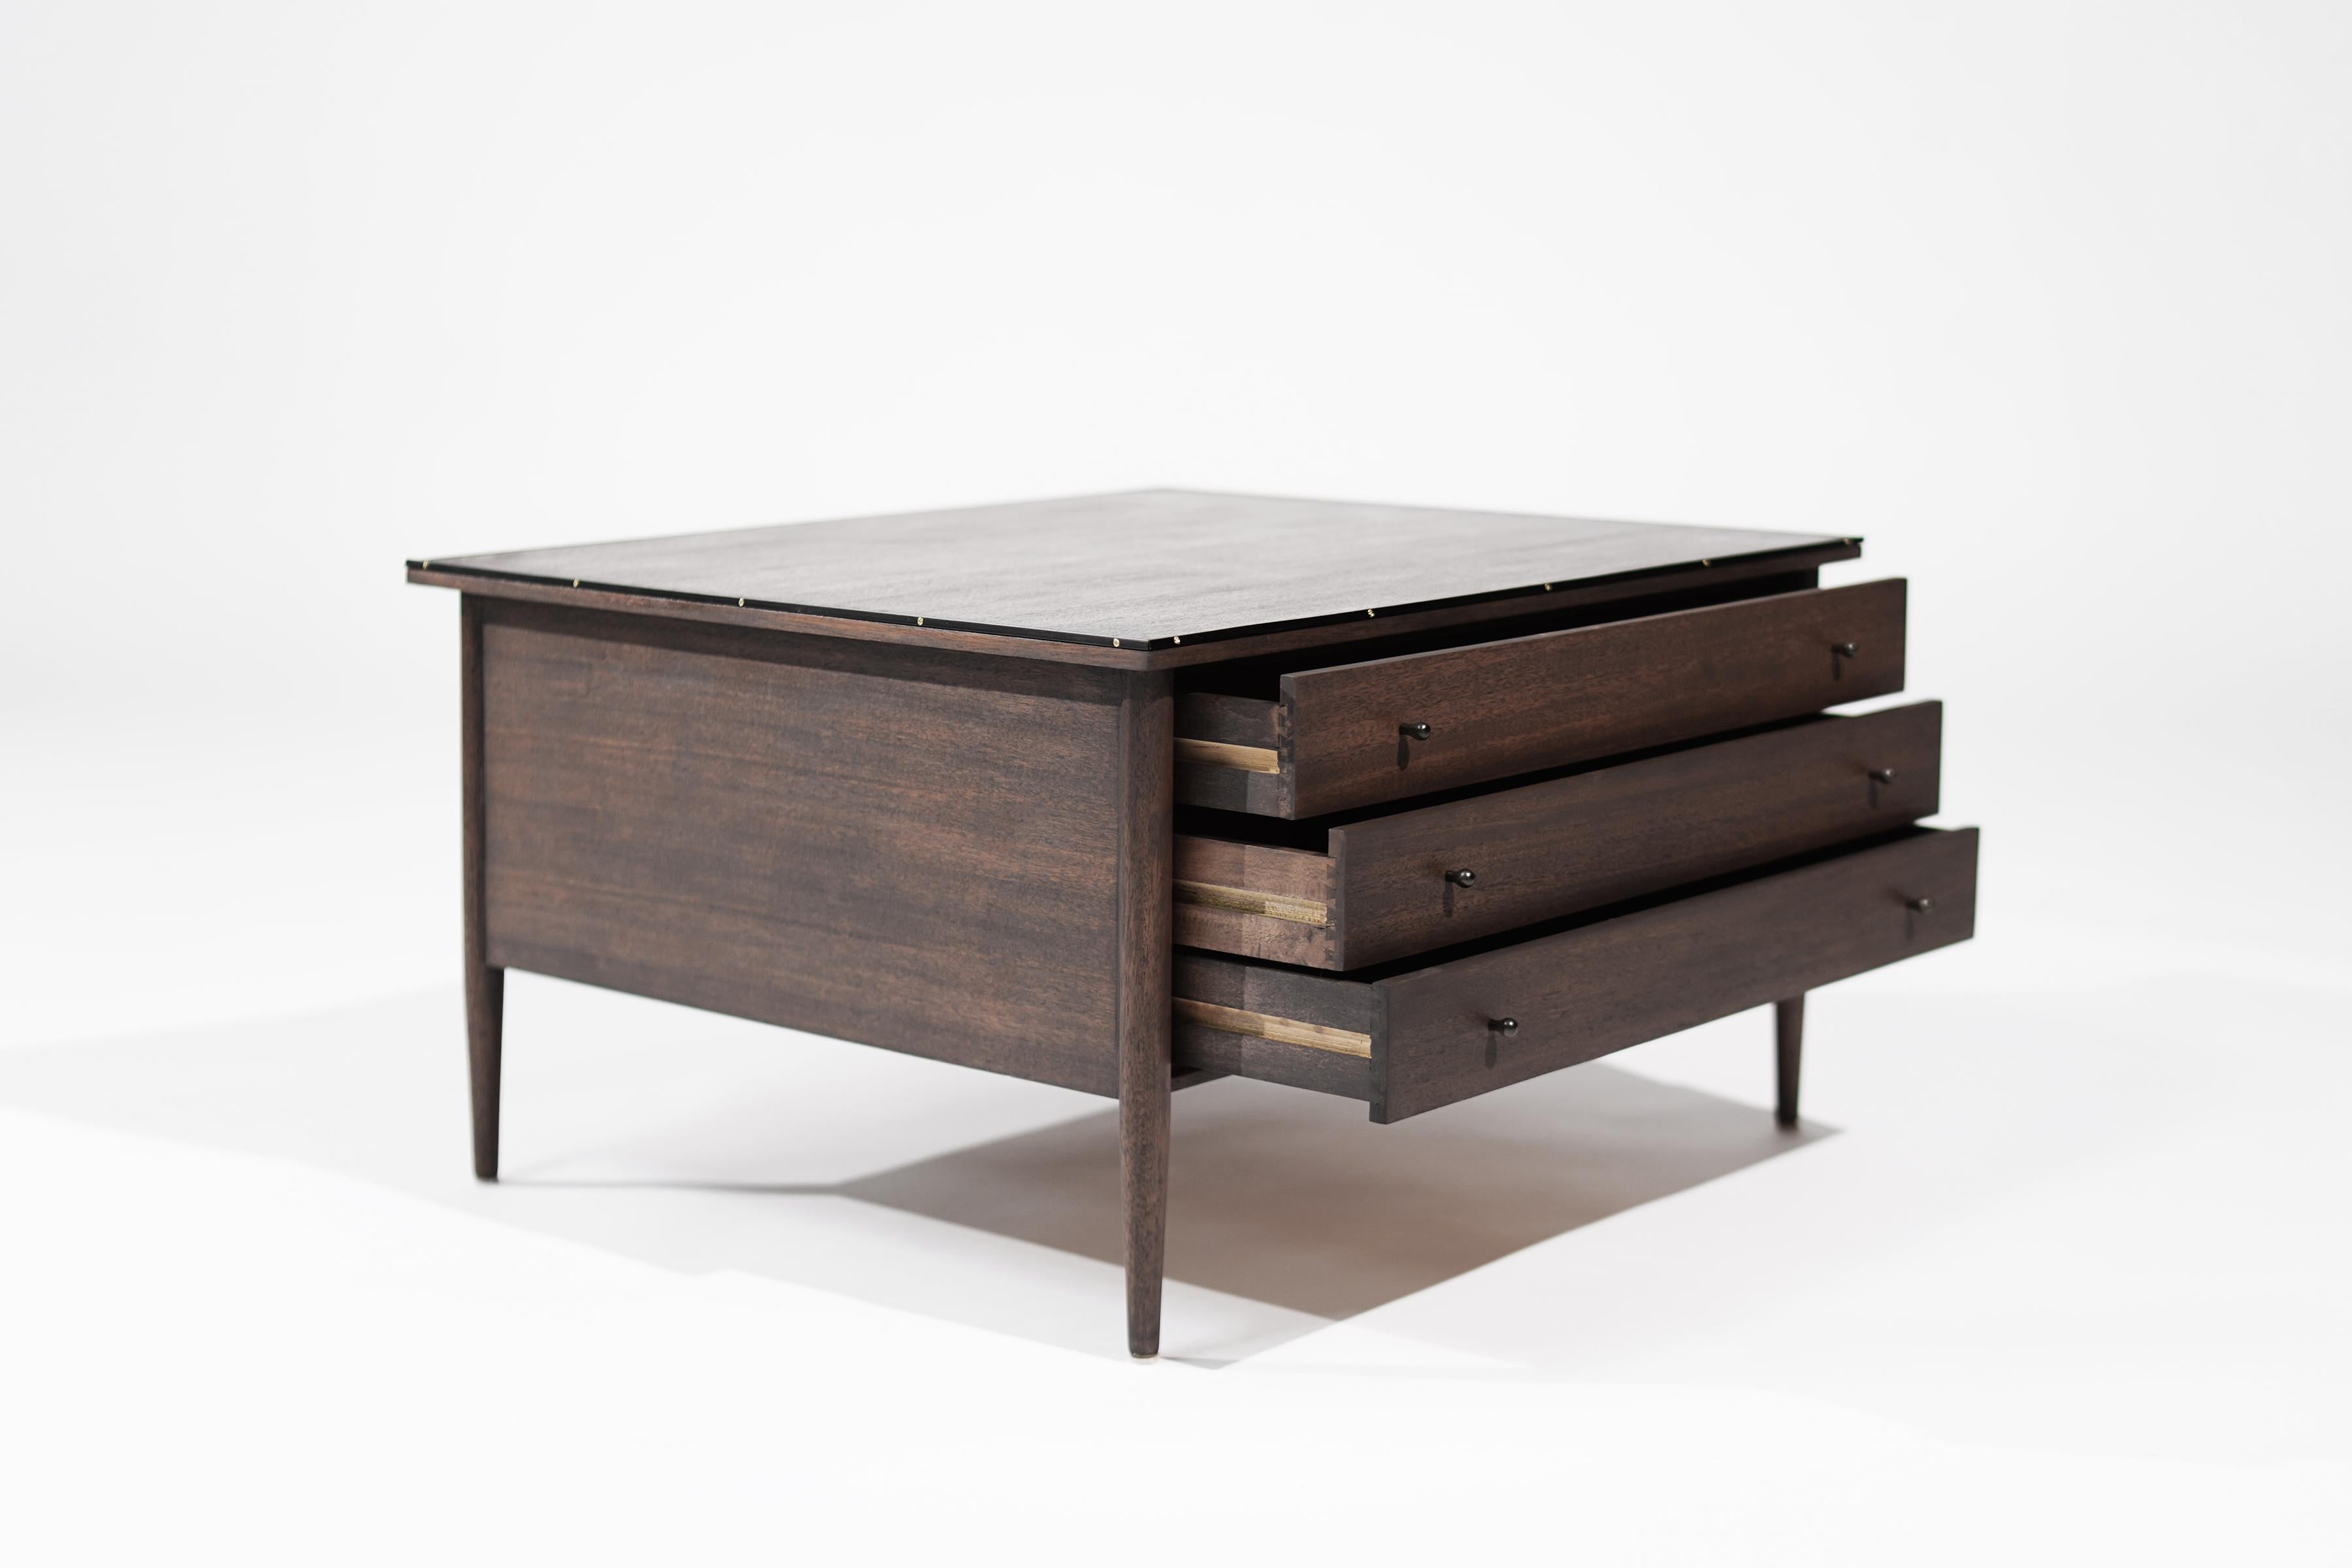 20th Century Connoisseur Collection Coffee Table by Paul McCobb, C. 1950s For Sale